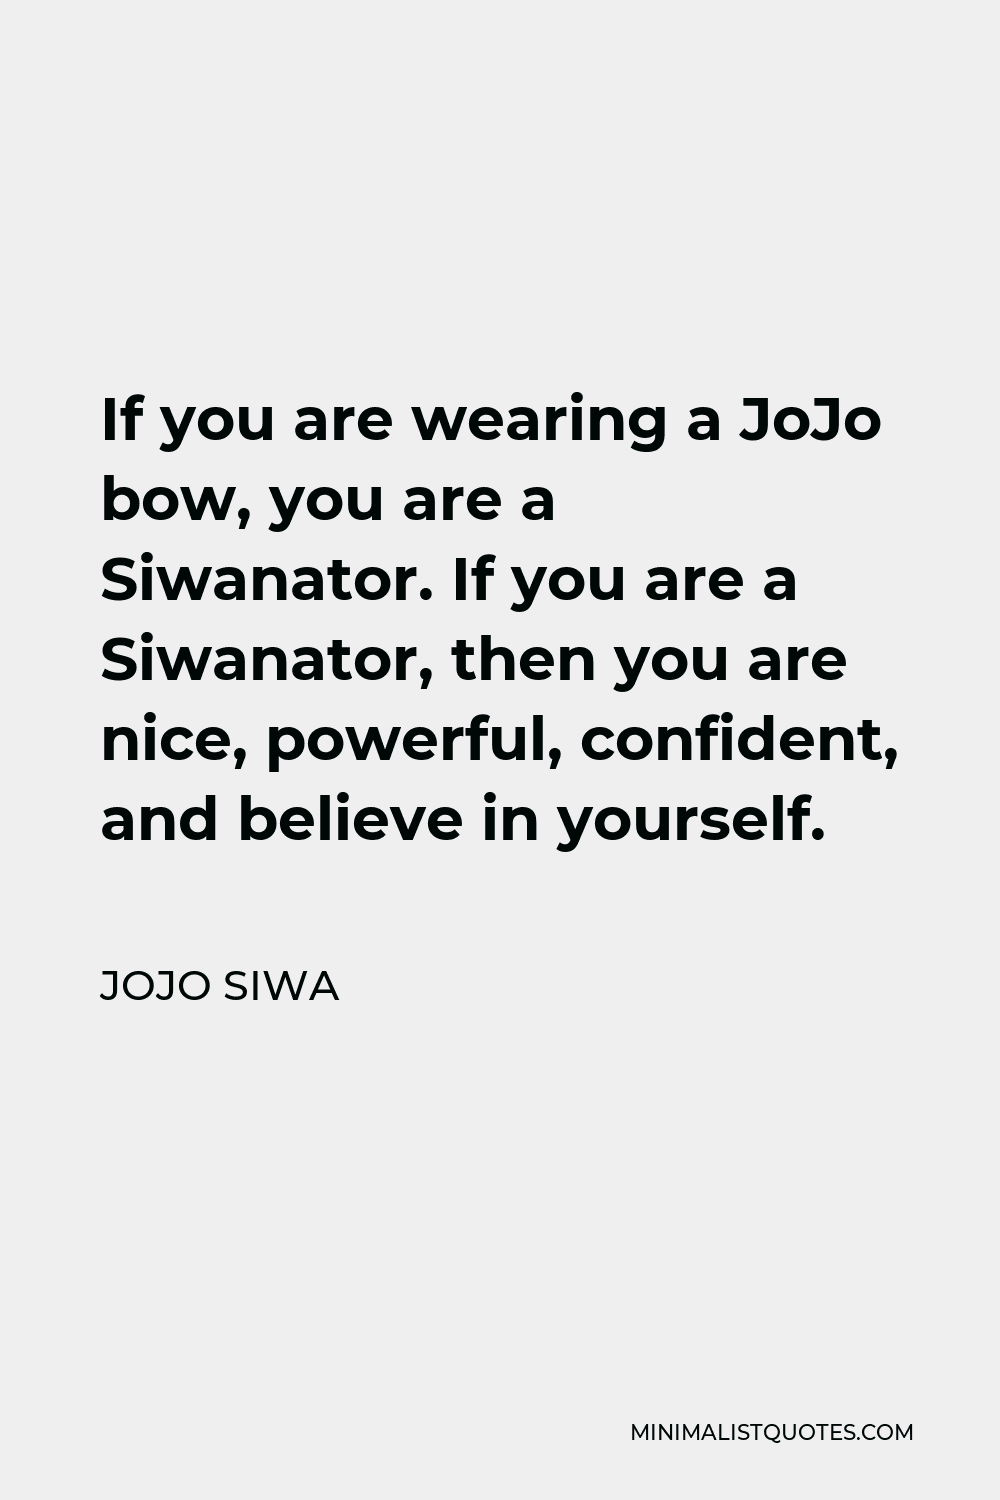 JoJo Siwa Quote - If you are wearing a JoJo bow, you are a Siwanator. If you are a Siwanator, then you are nice, powerful, confident, and believe in yourself.